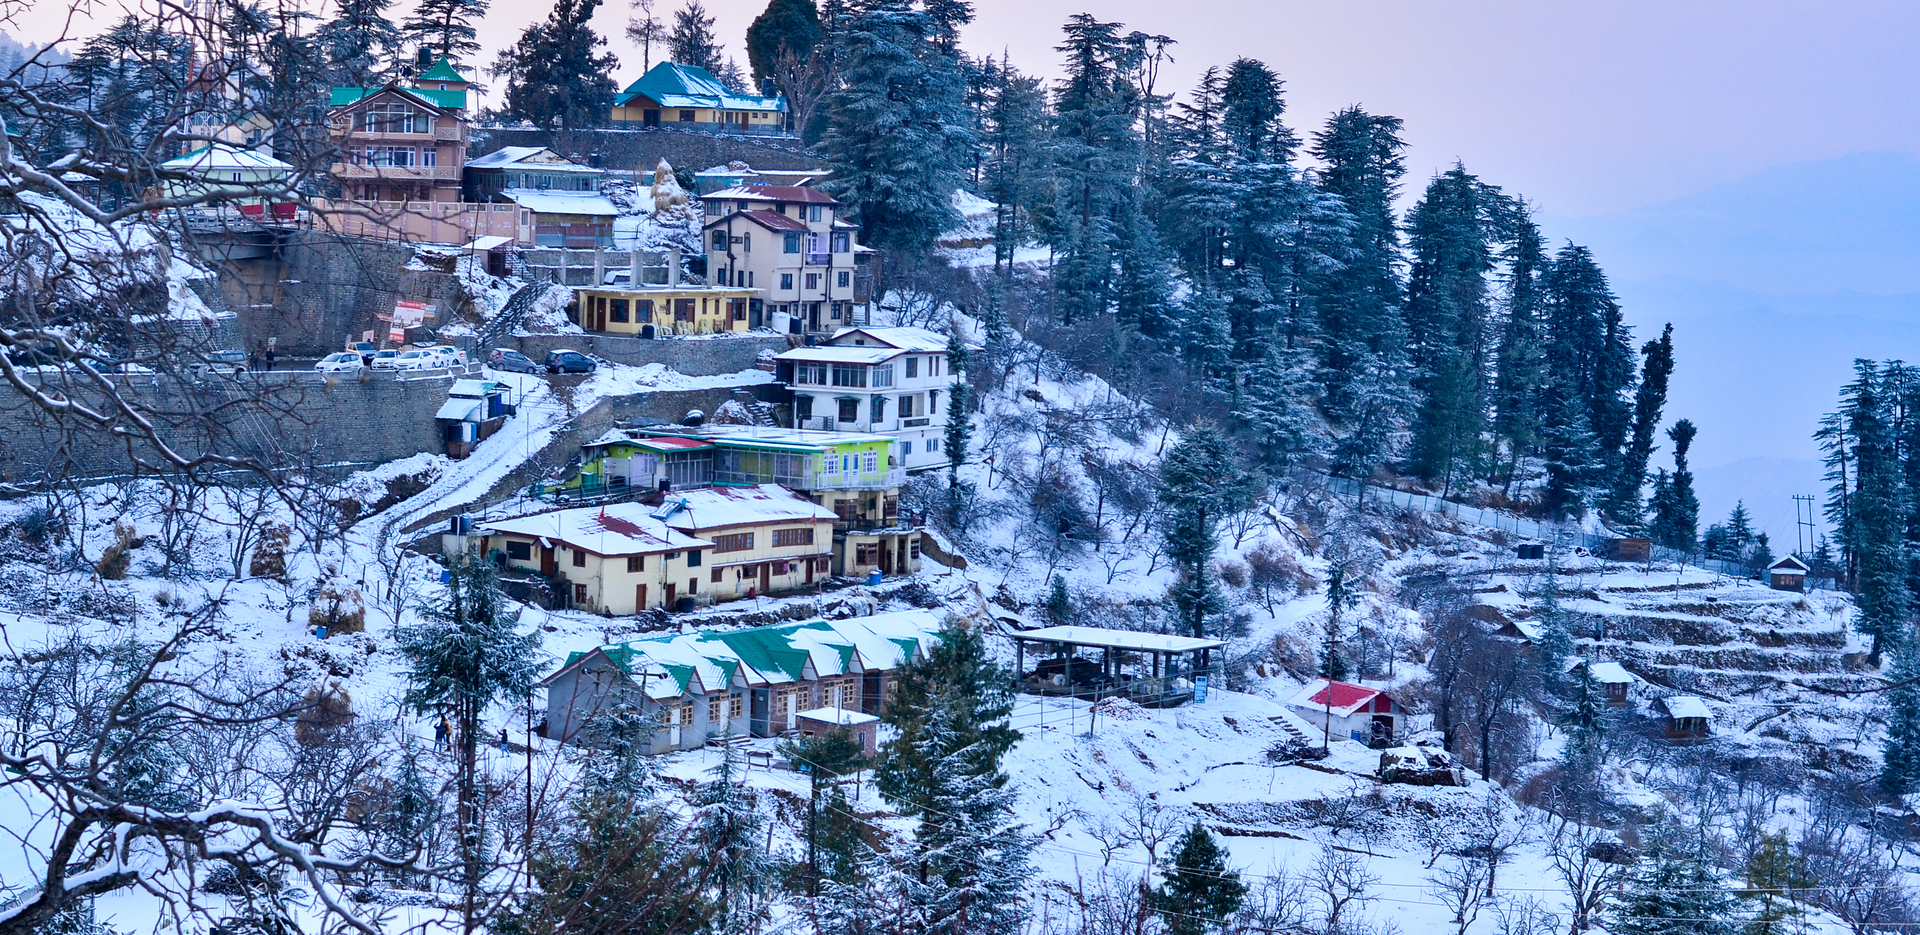 shimla trip cost for 3 days